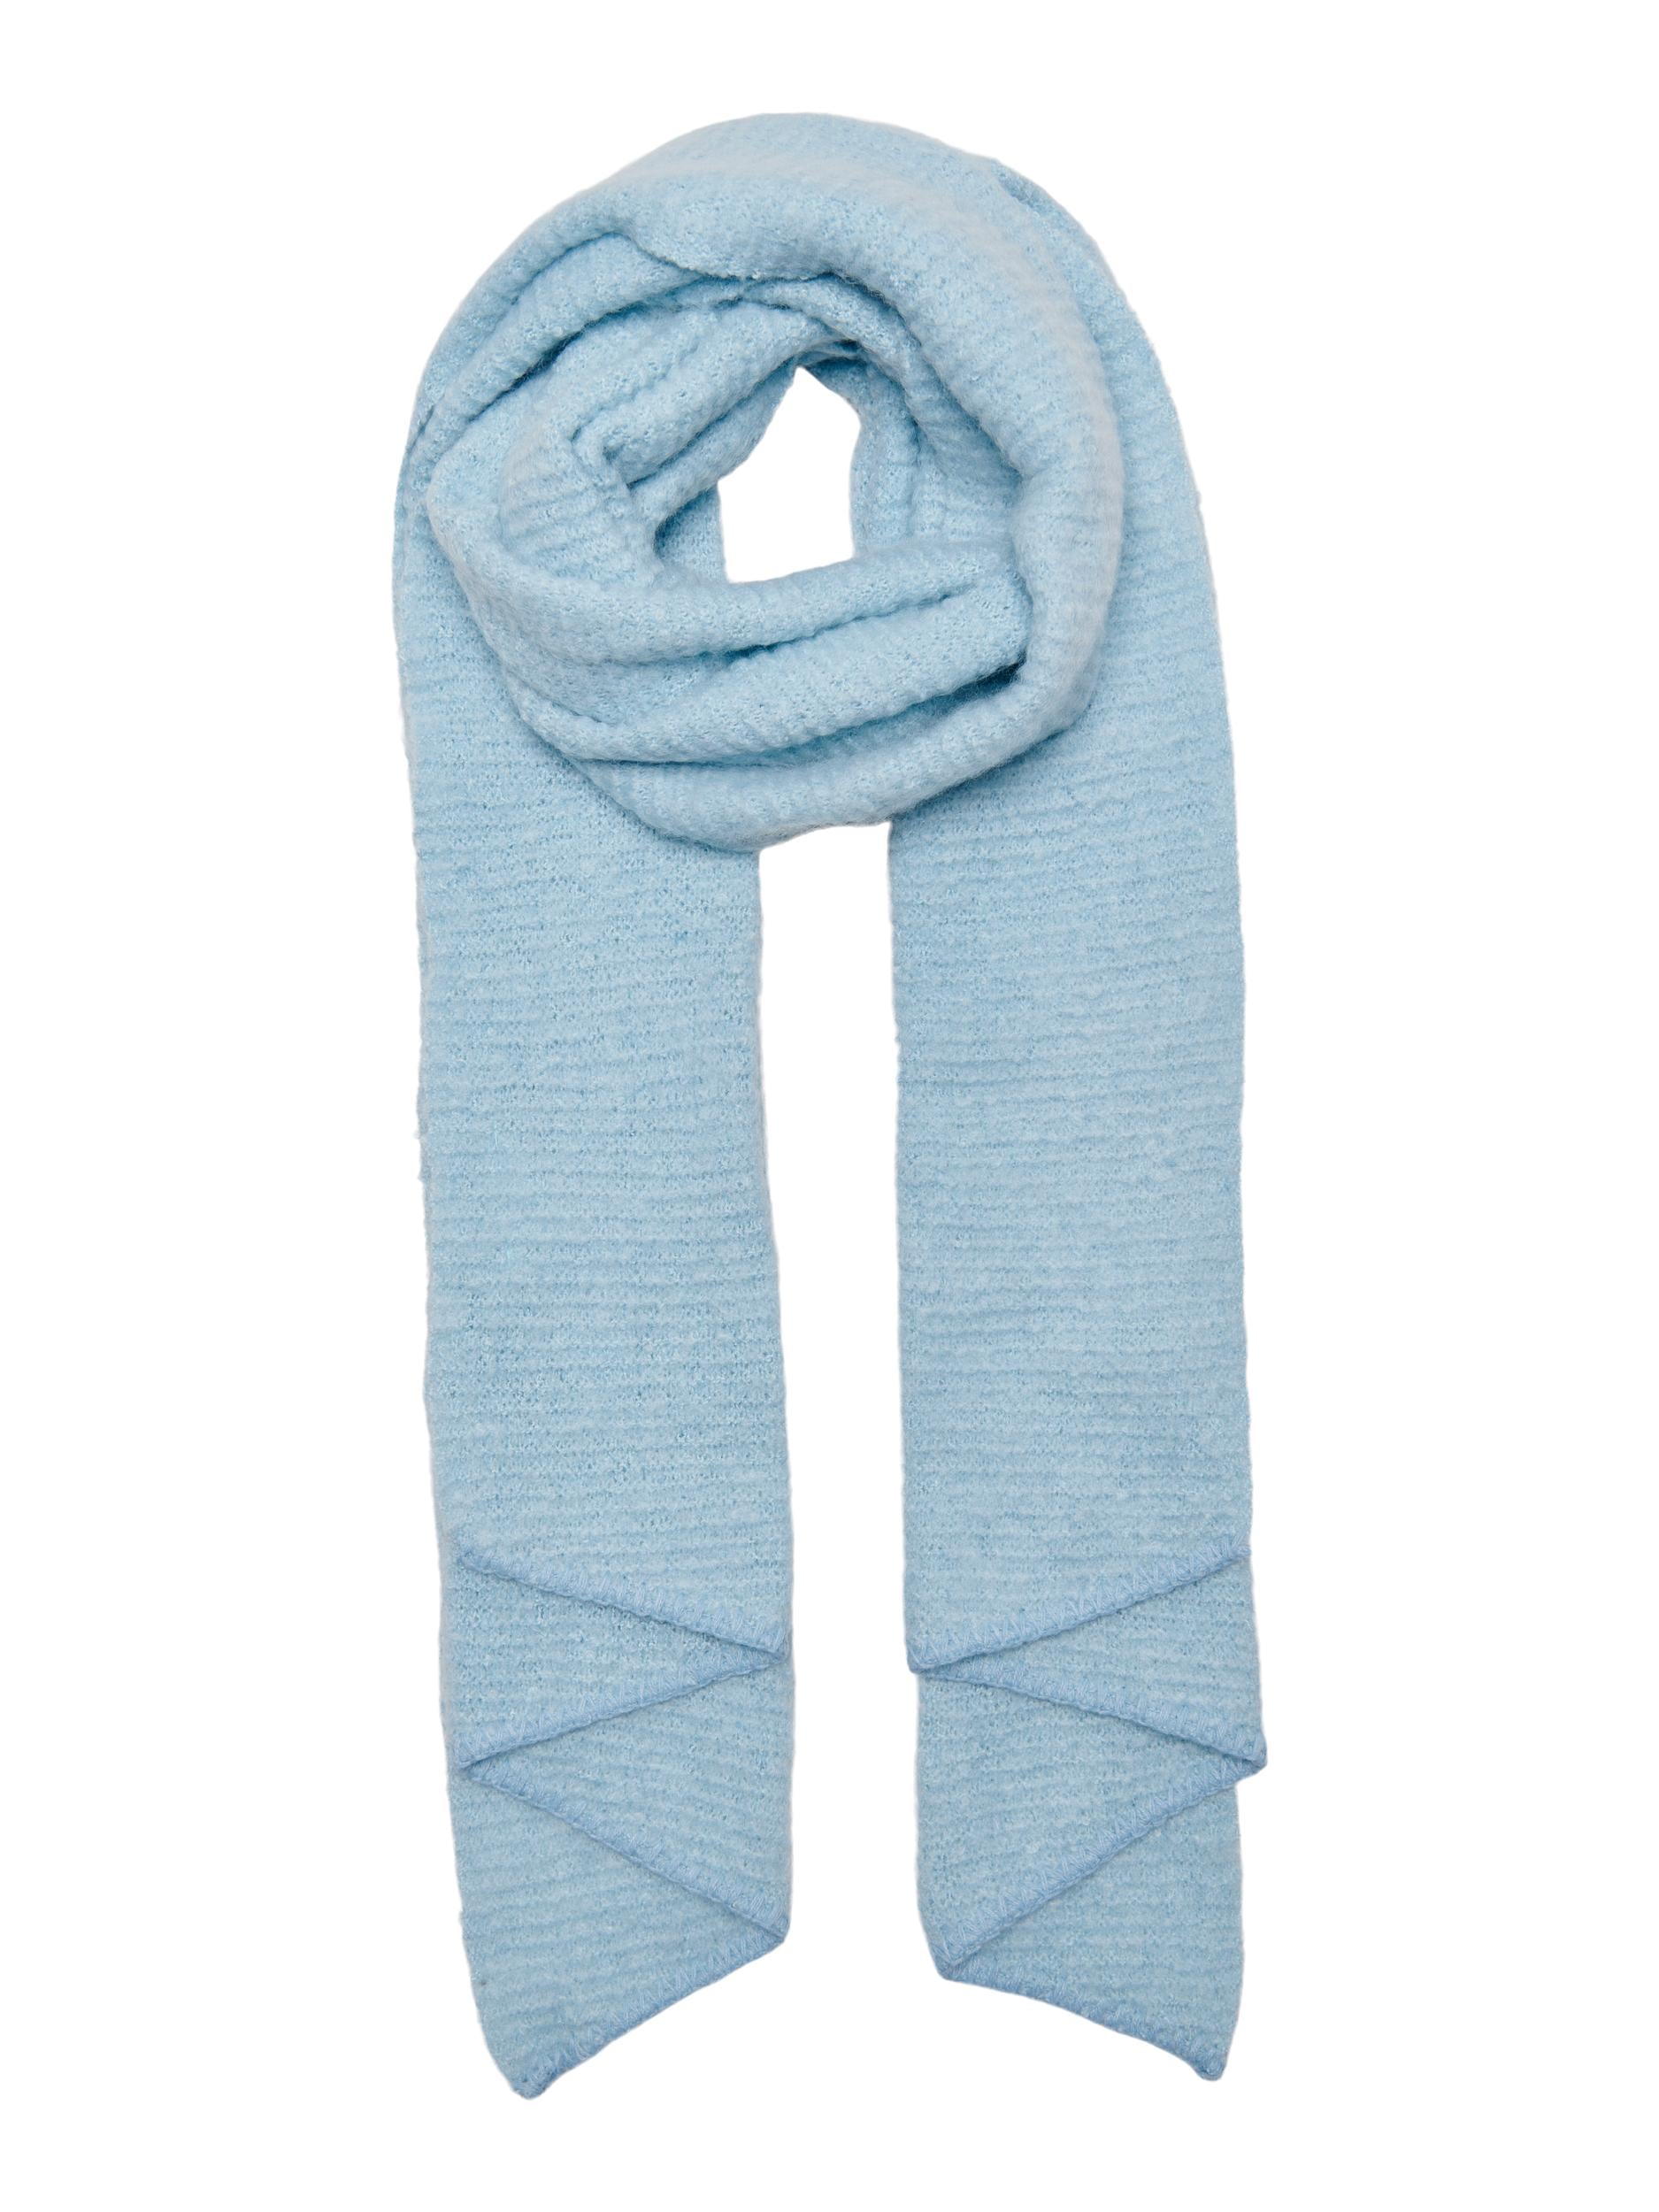 ♕ SCARF LIFE »ONLMERLE KNITTED bei NOOS« Strickschal ONLY